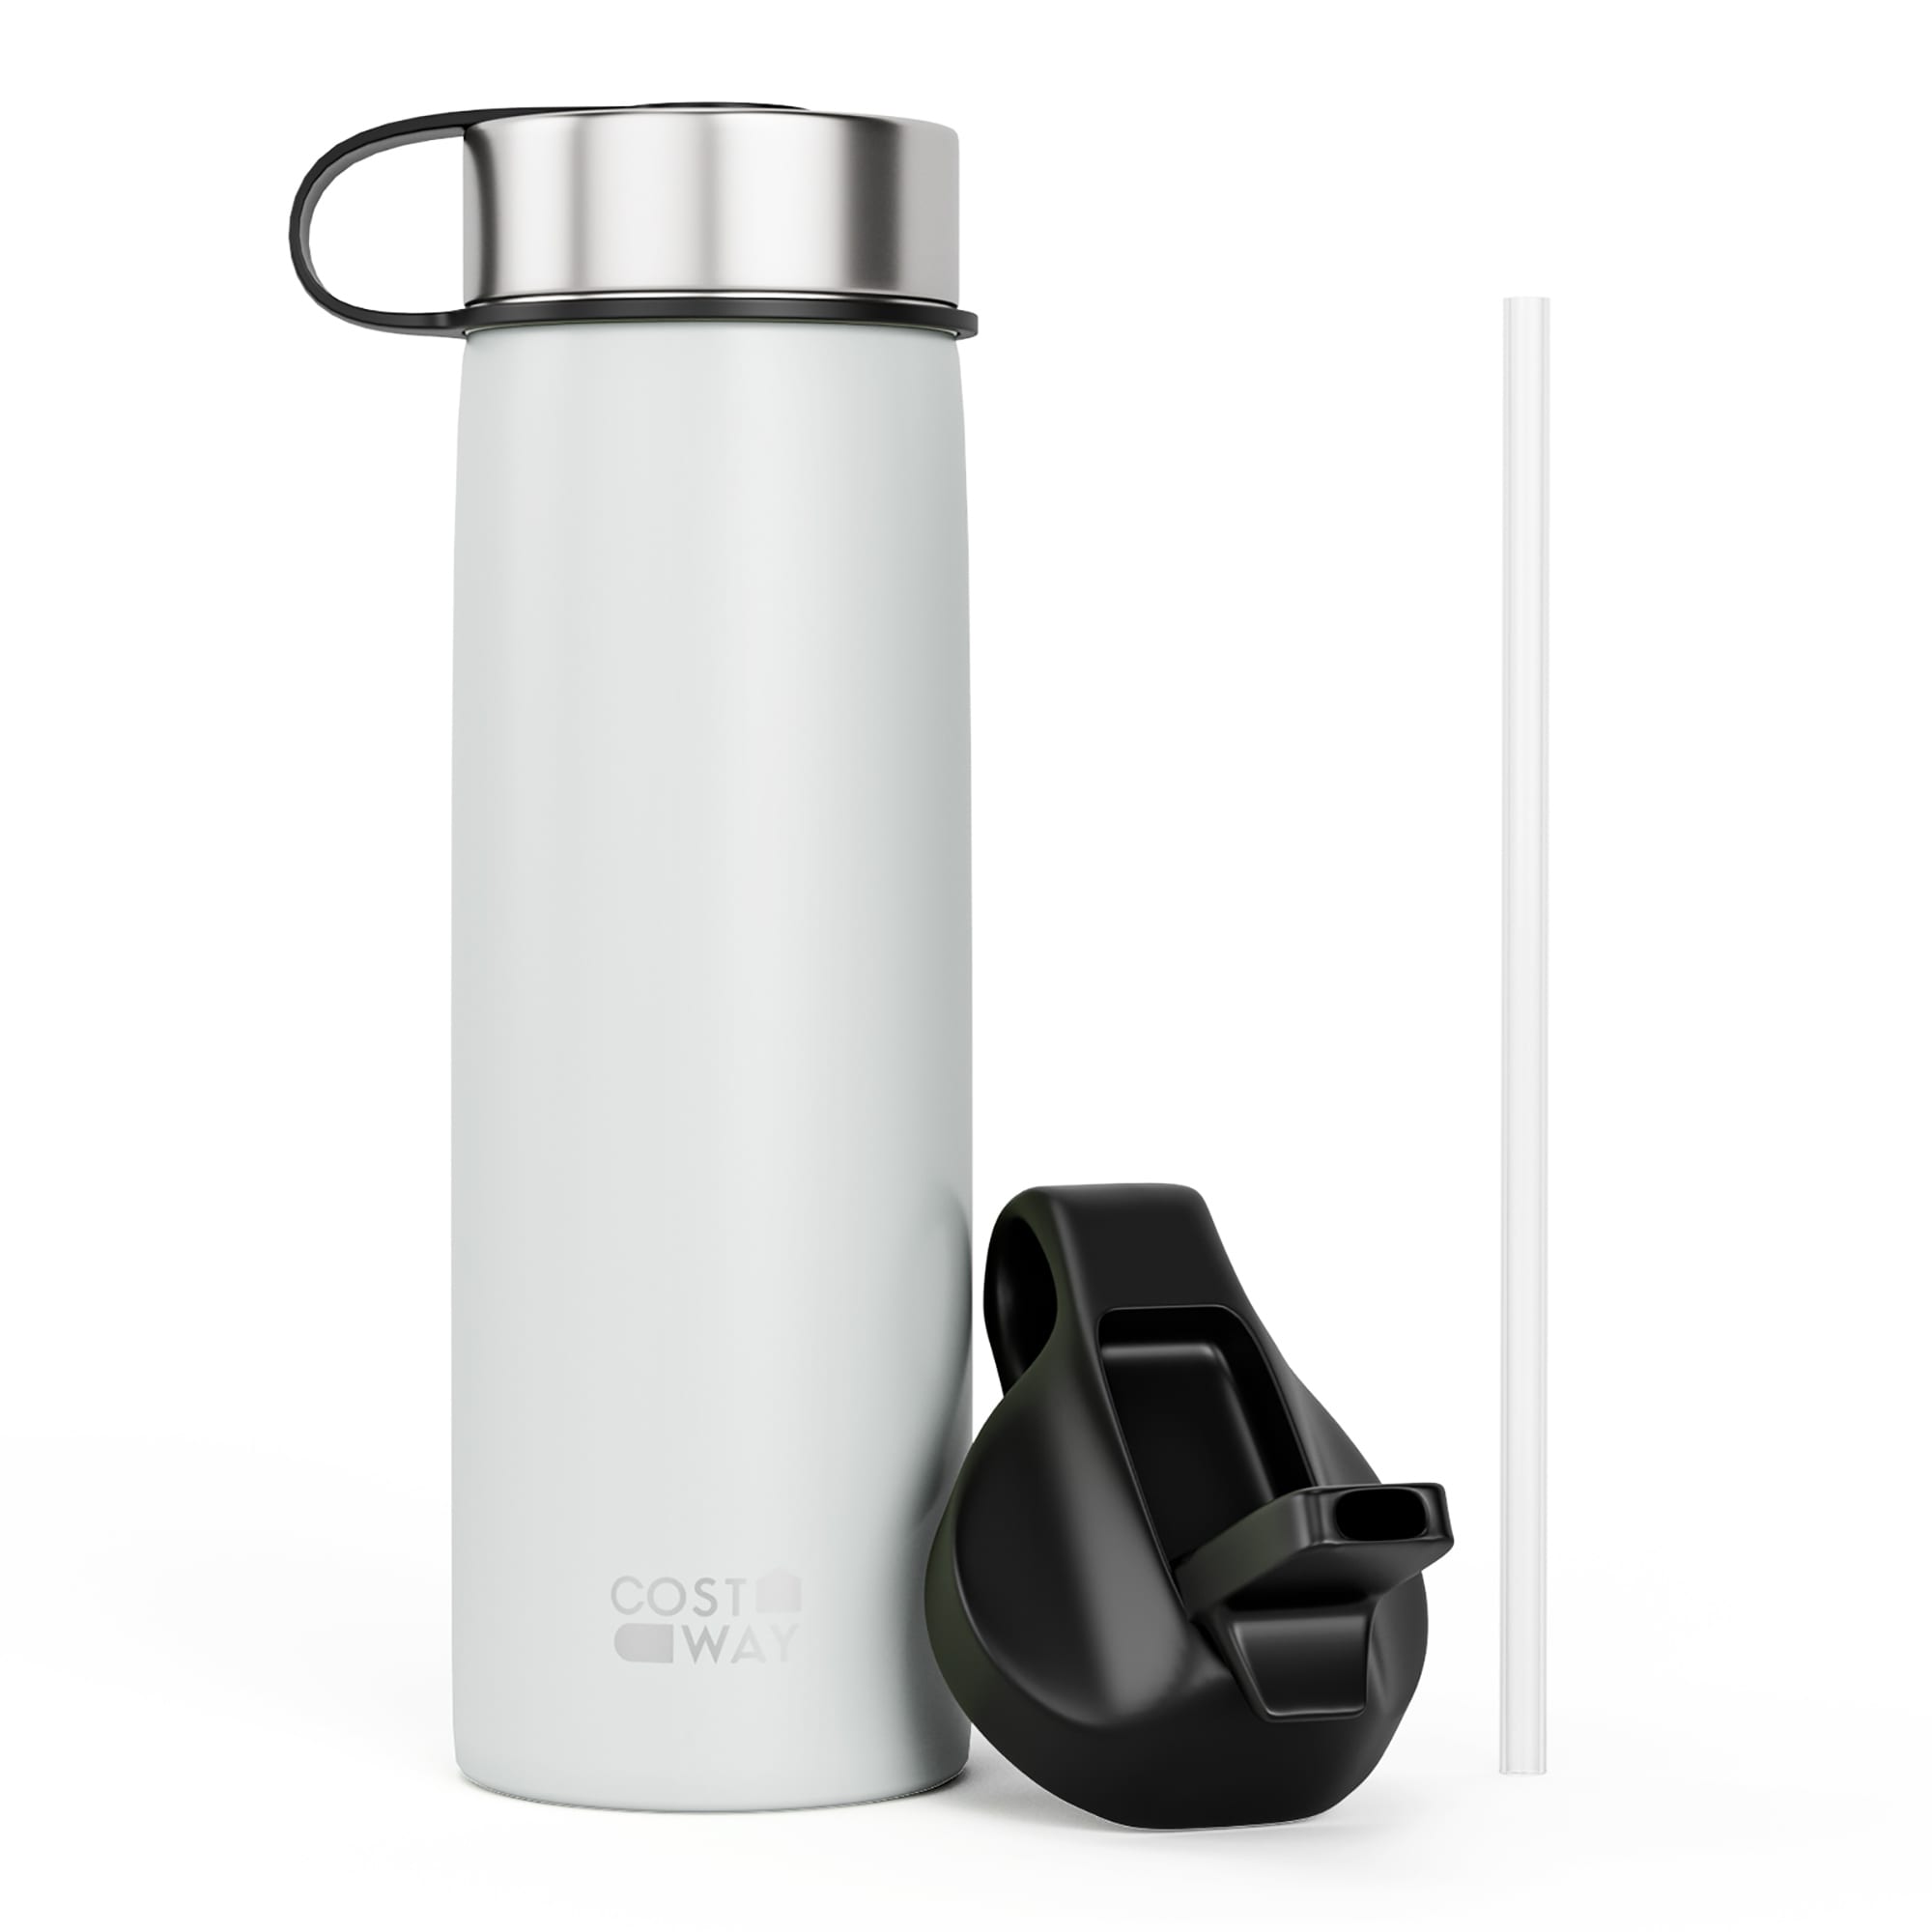 https://ak1.ostkcdn.com/images/products/is/images/direct/181a75abb0cc0378ac59dea688fbe88616ce2b9a/Costway-22-oz-Double-Wall-Insulated-Water-Bottle-Stainless-Steel-w--2.jpg